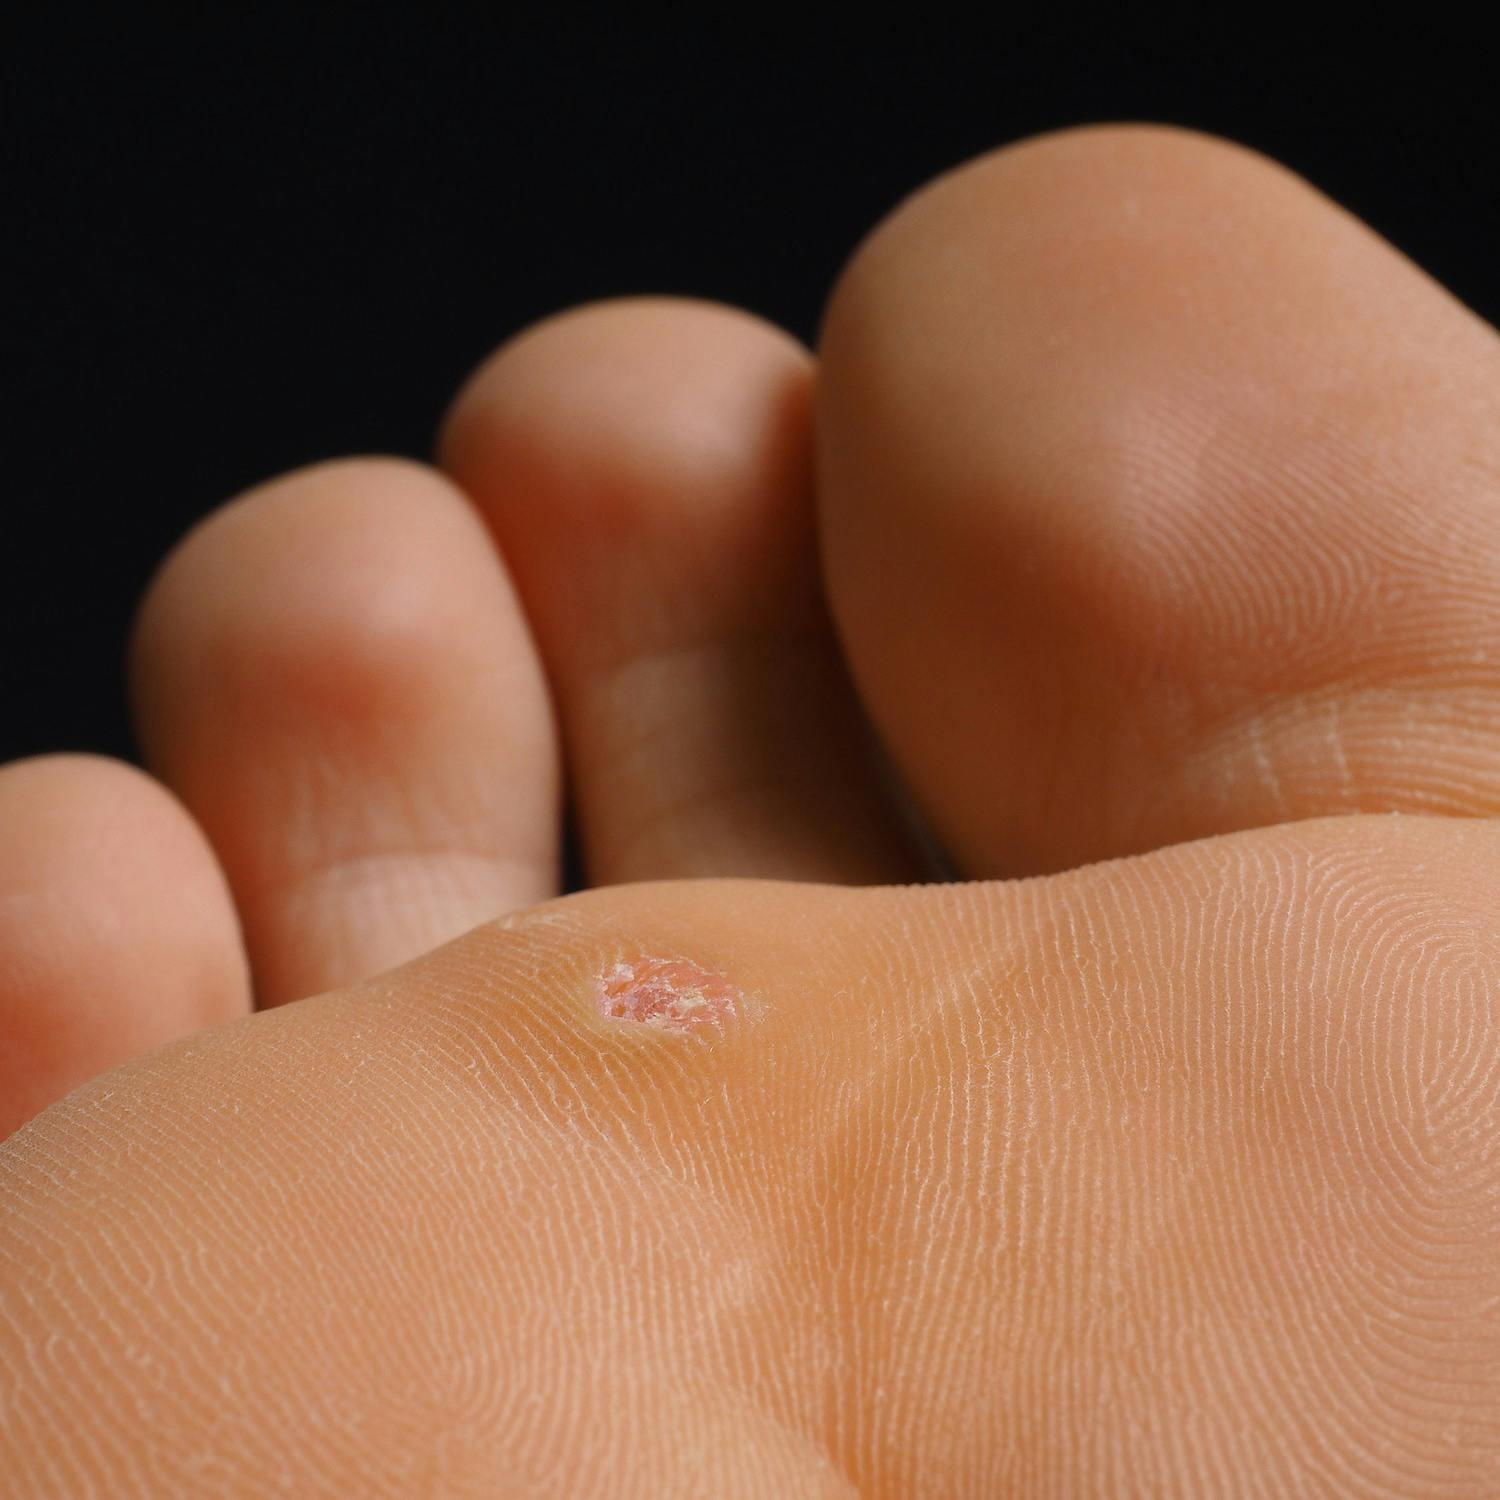 wart virus live on shoes)